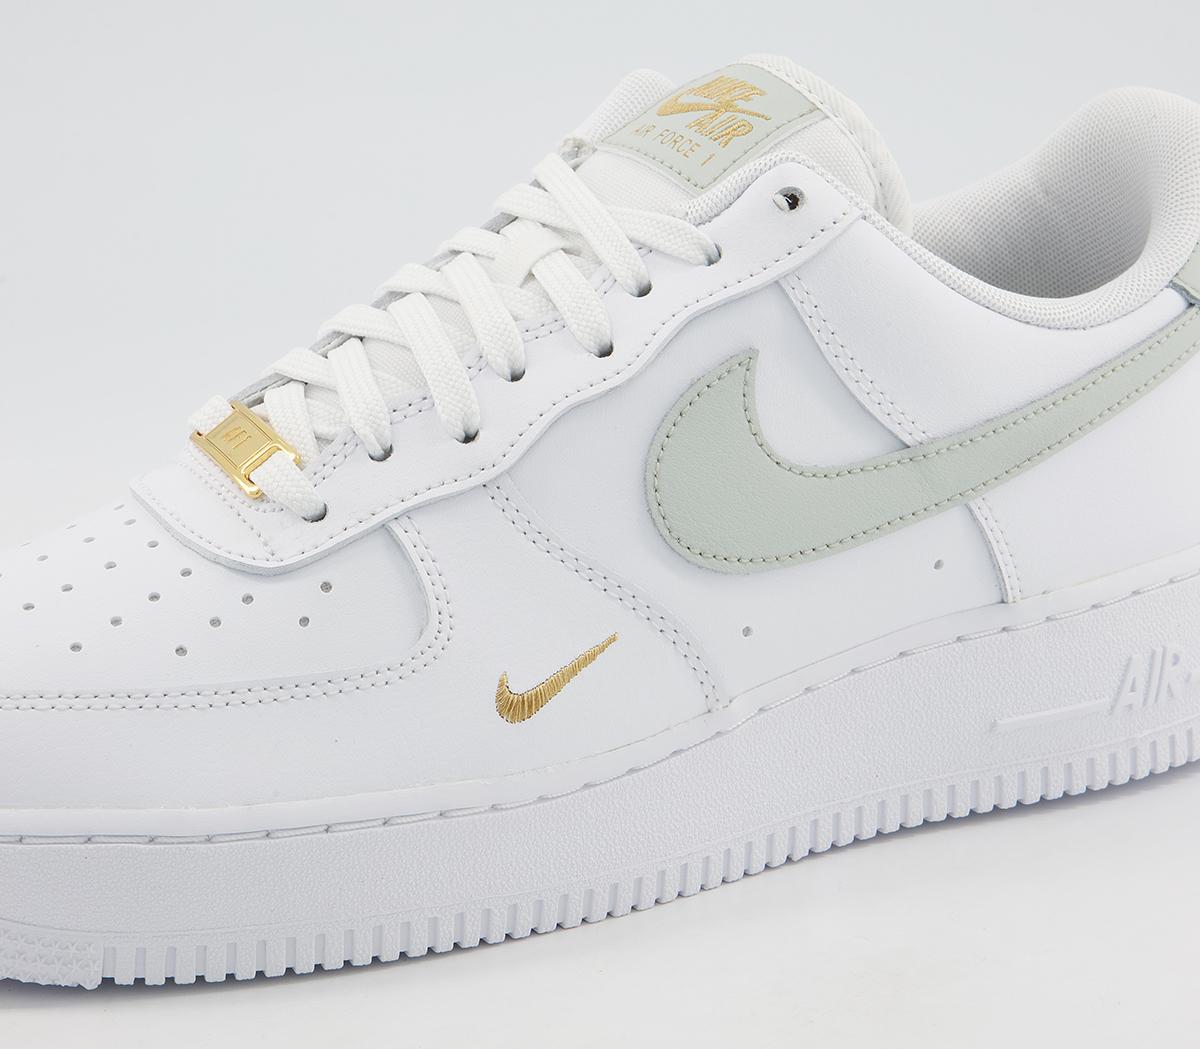 Nike Air Force 1 07 Trainers White Light Silver - Nike Air Force 1